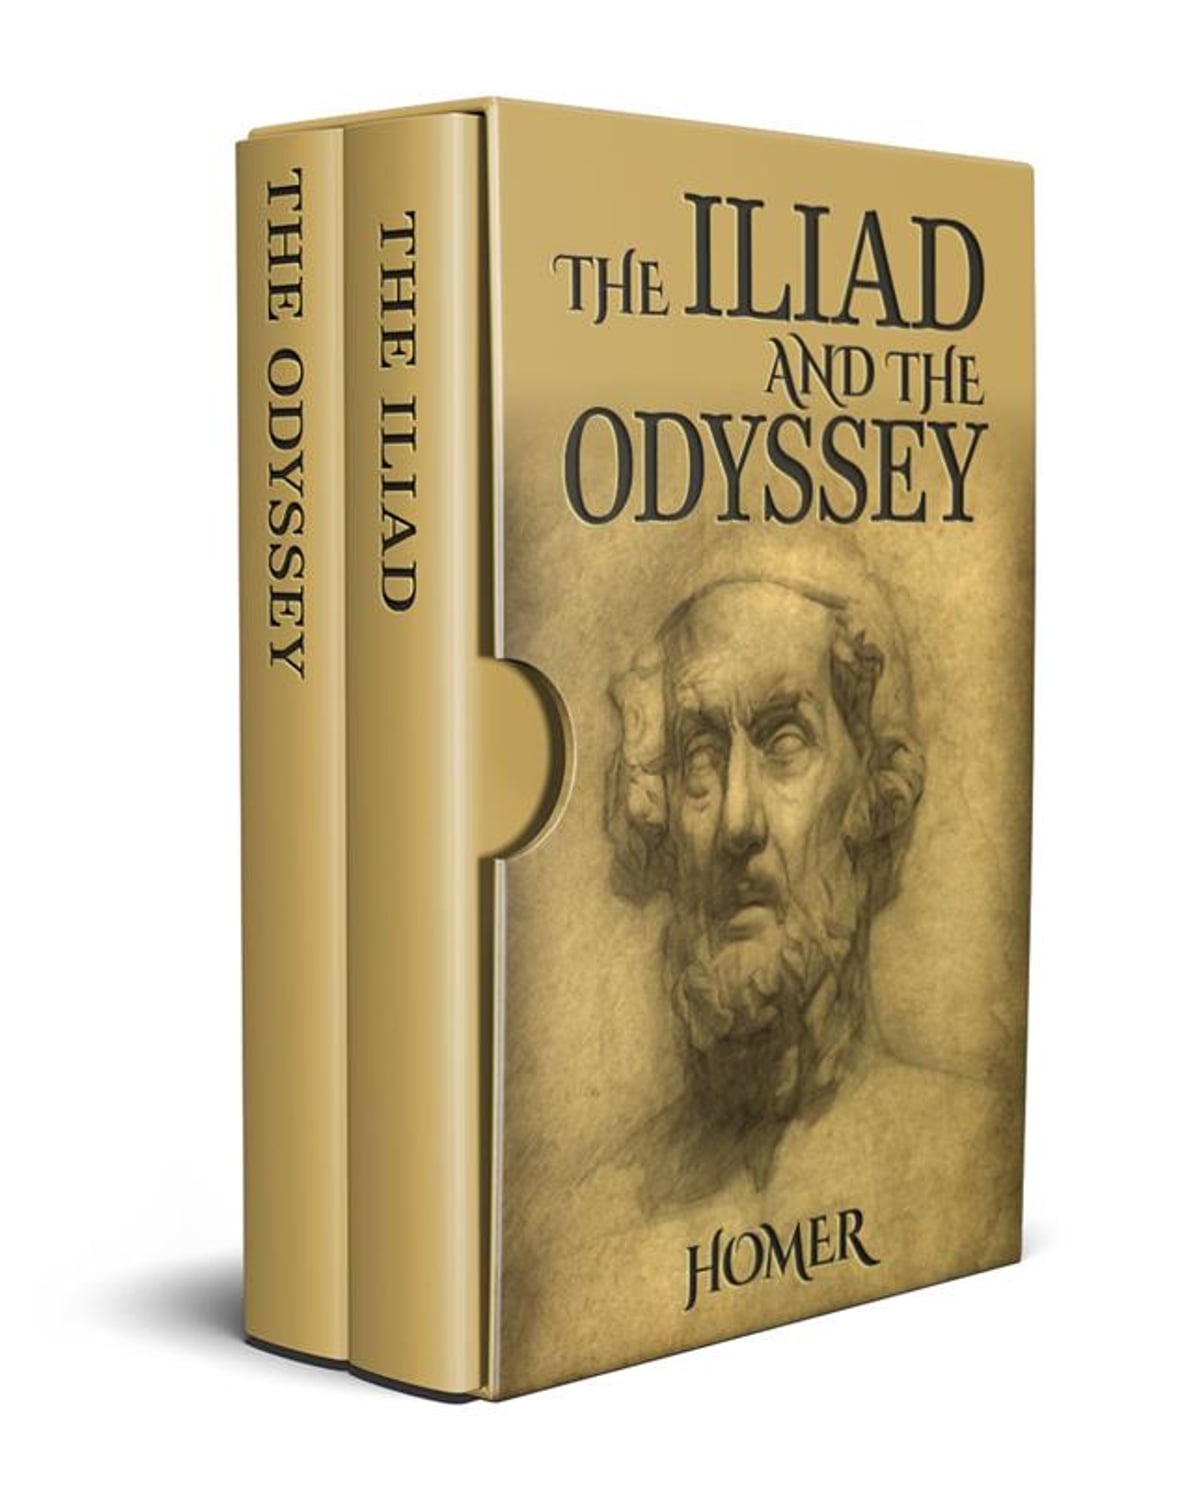 How a Translation of ‘The Iliad’ into Modern Language Reinforces Its Relevance to Popcorn Boxes